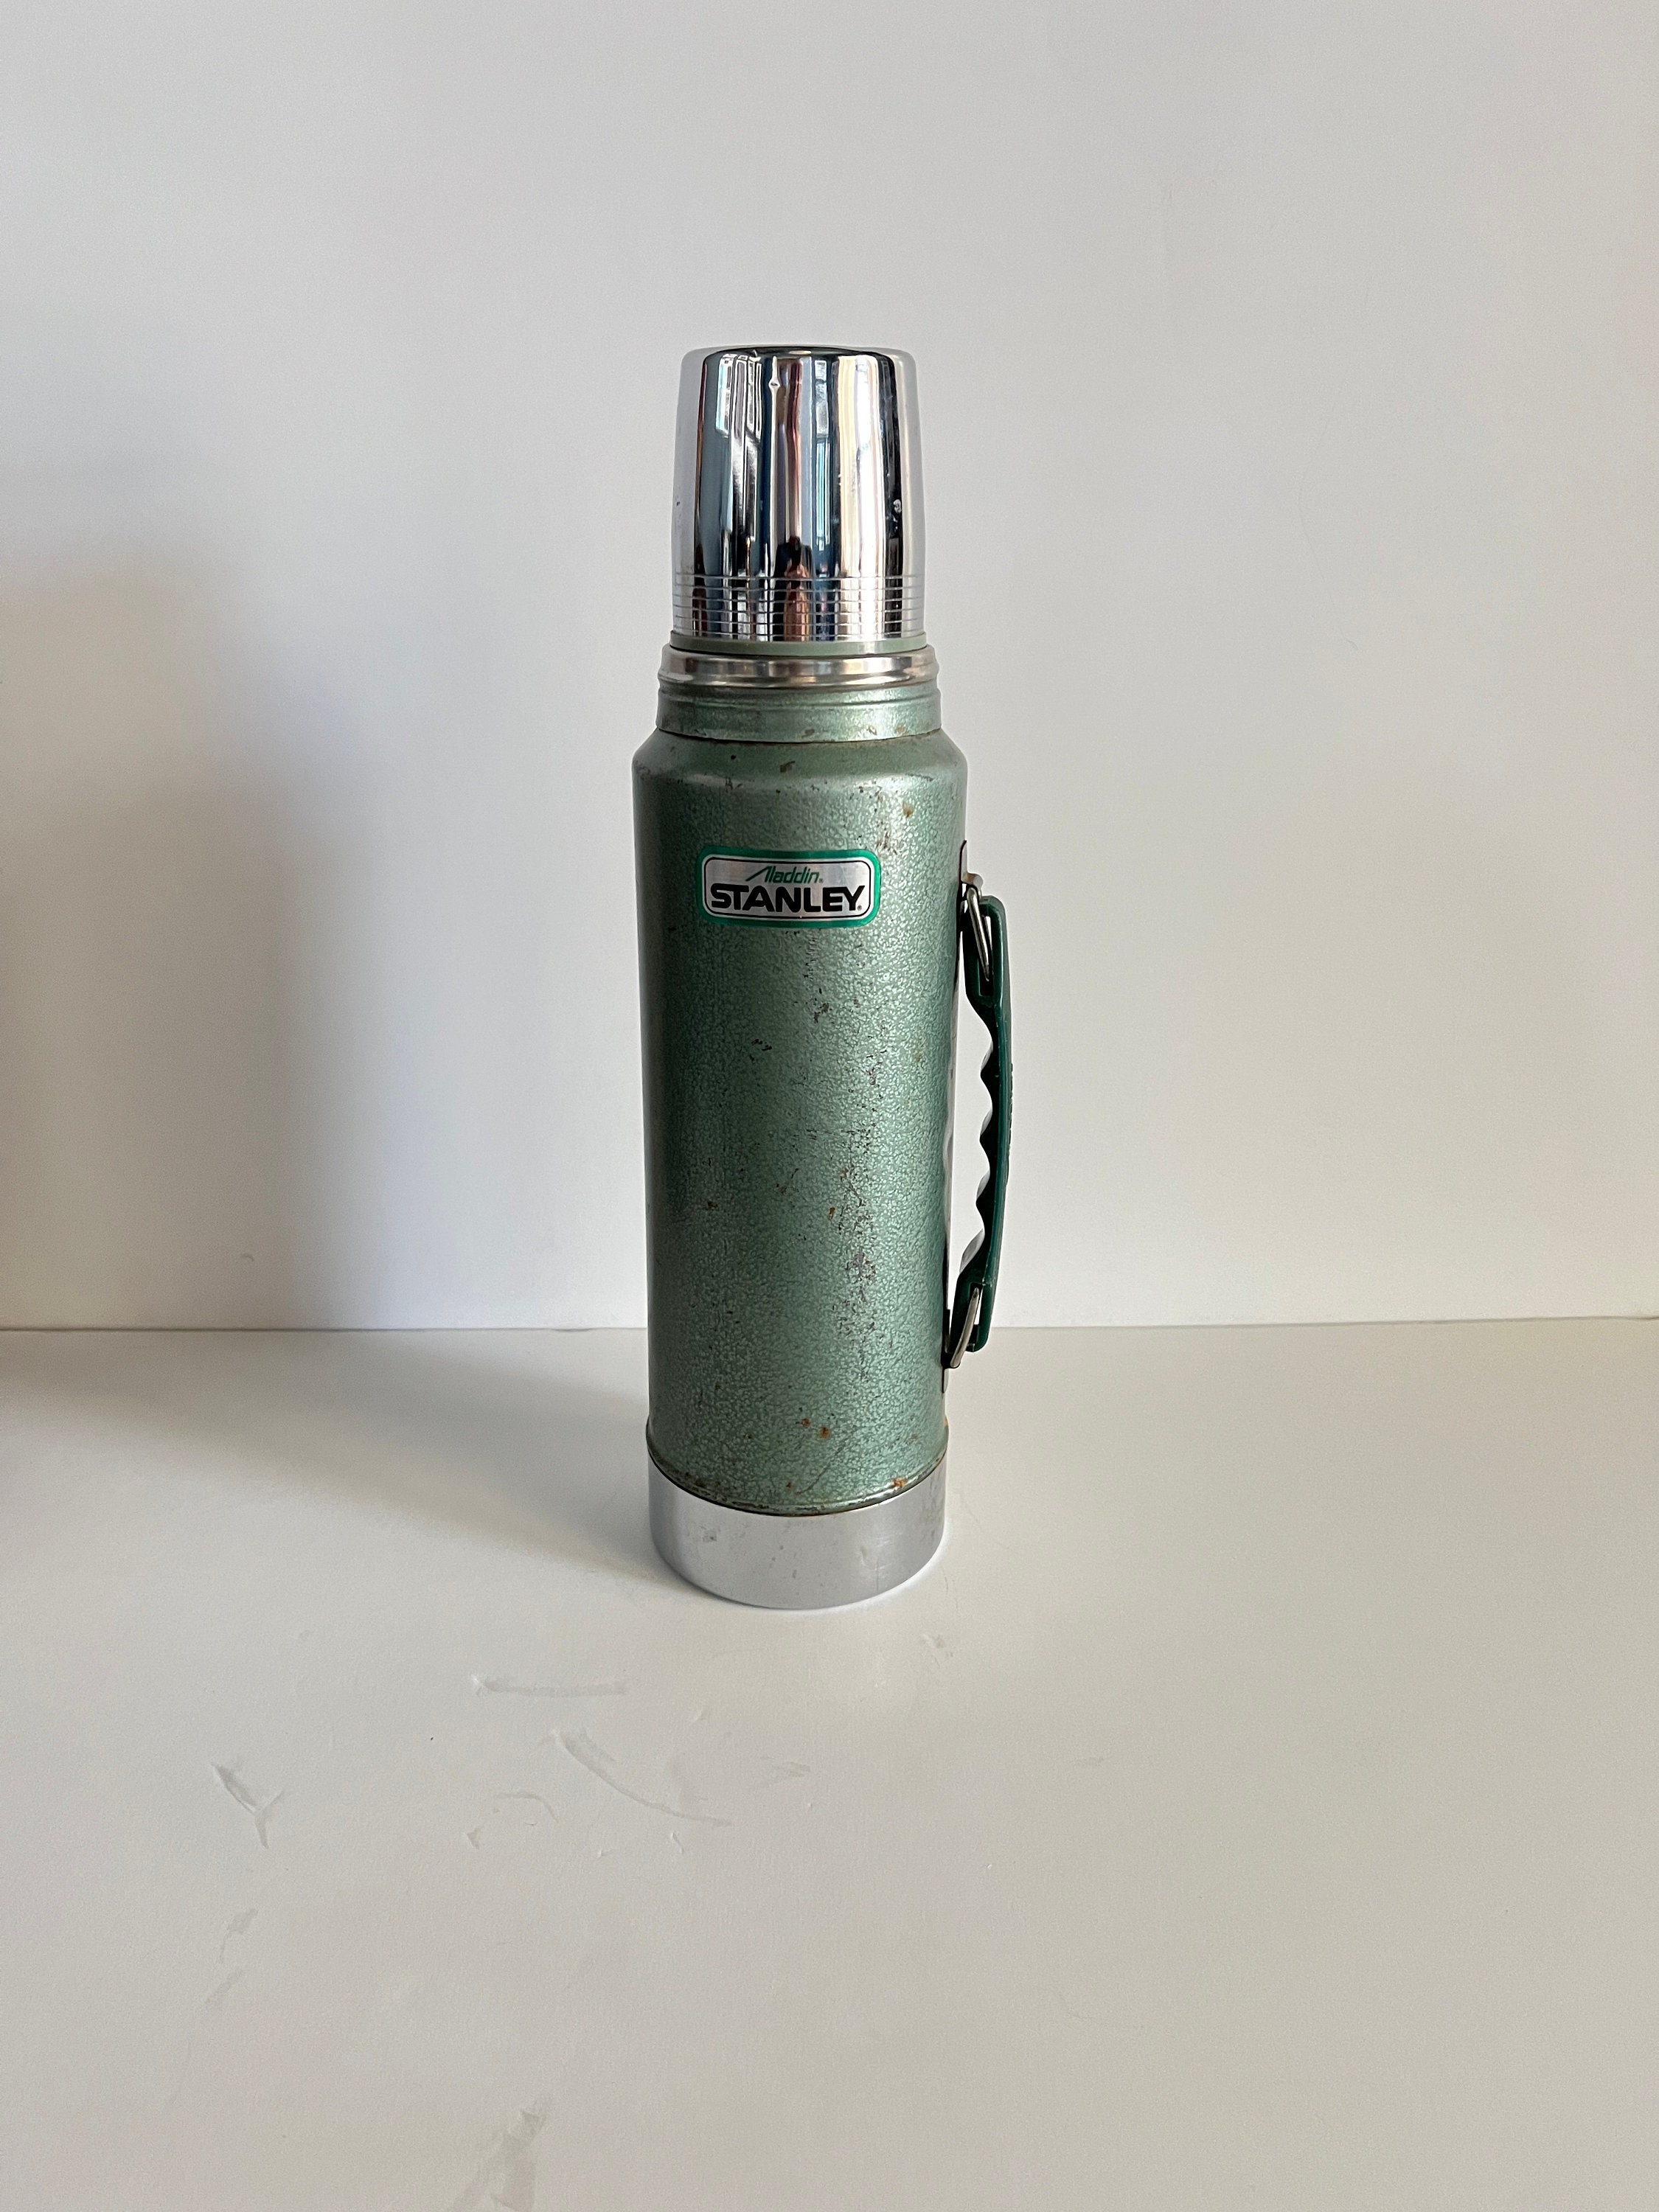 Vintage Stanley Super Vac Thermos and Cork Dated 3-1949 New Britton, - Ruby  Lane